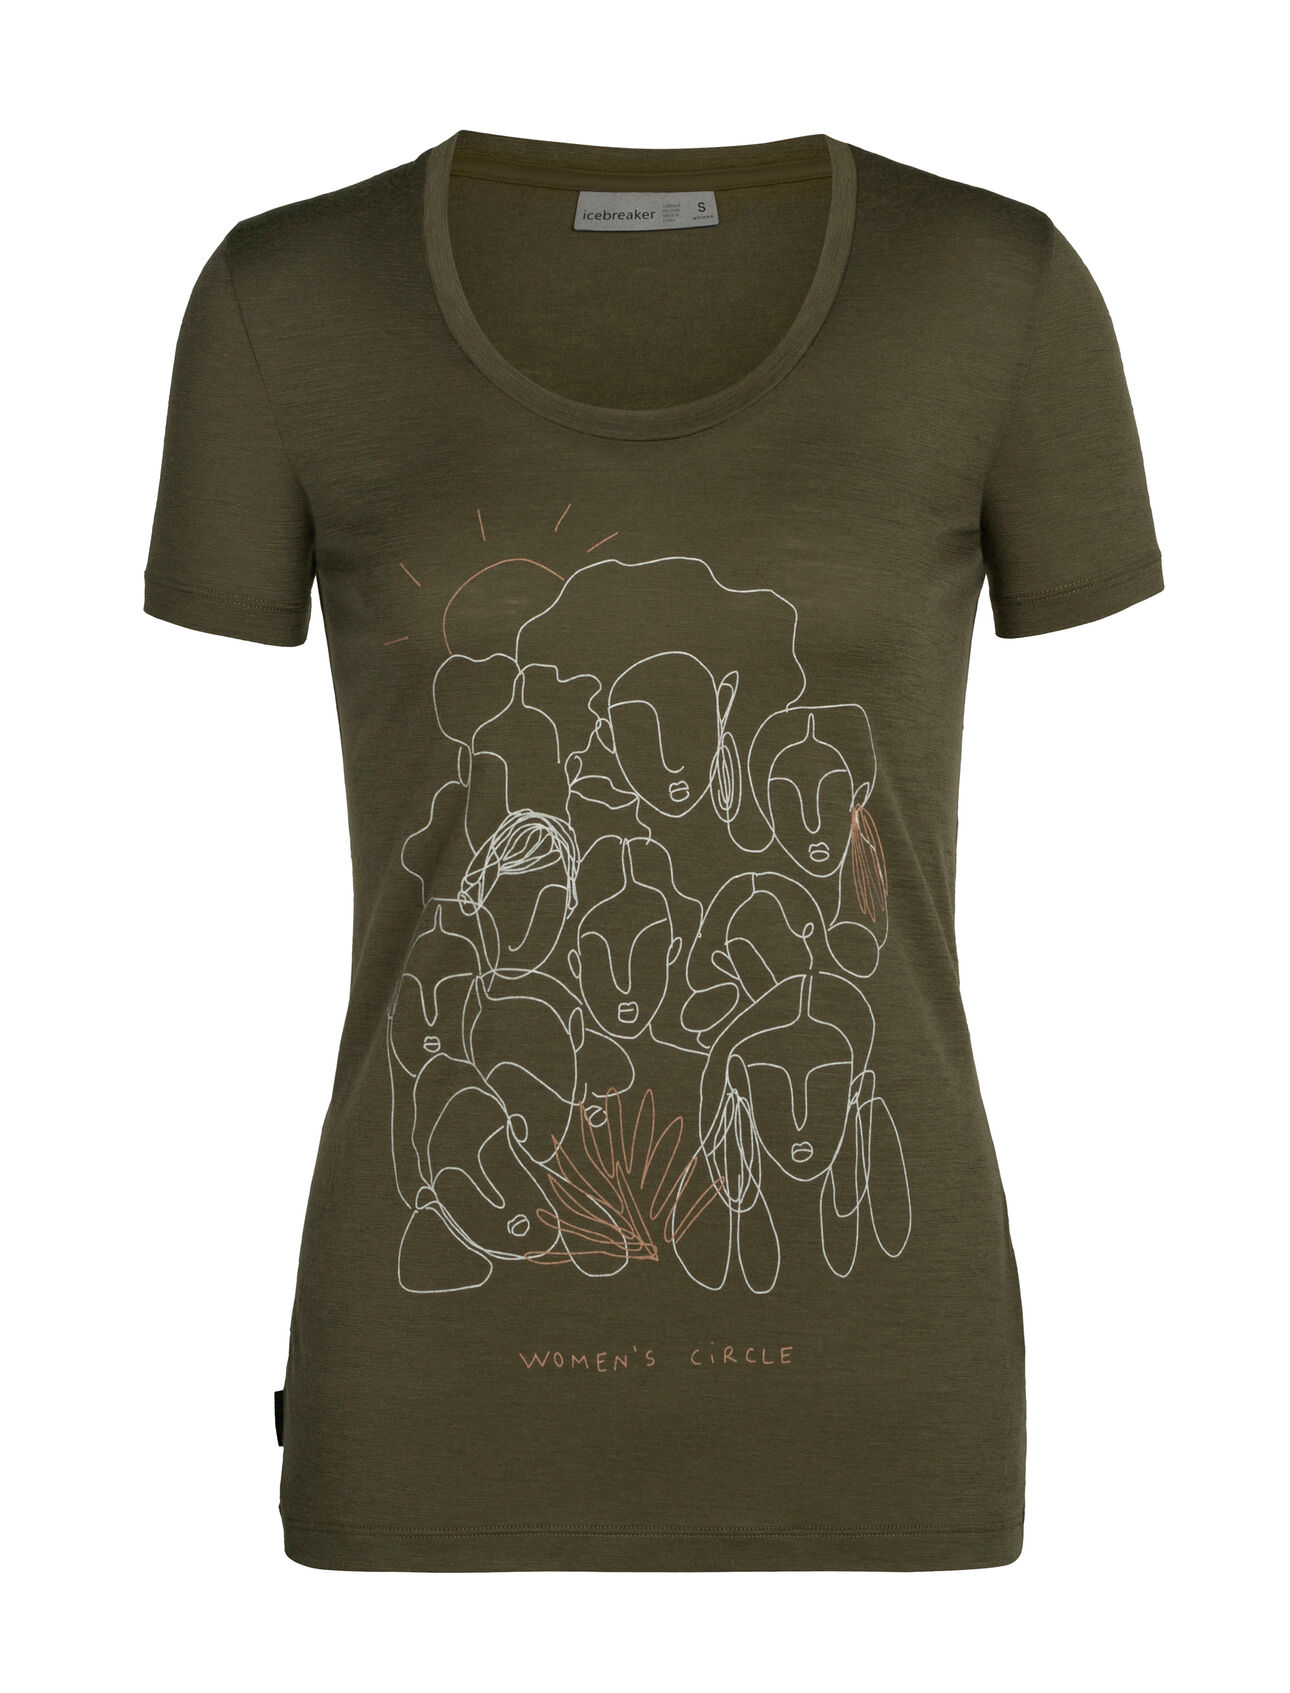 Womens Merino Tech Lite II Short Sleeve Scoop T-Shirt Circle Our versatile Tech Tee that provides comfort, breathability and odor-resistance for any adventure you can think of, the Tech Lite II Short Sleeve Scoop Tee Women's Circle features 100% merino for all-natural performance. The original artwork by Araki Koman inspires us to slow down, appreciate the beauty of simplicity, and live more consciously.